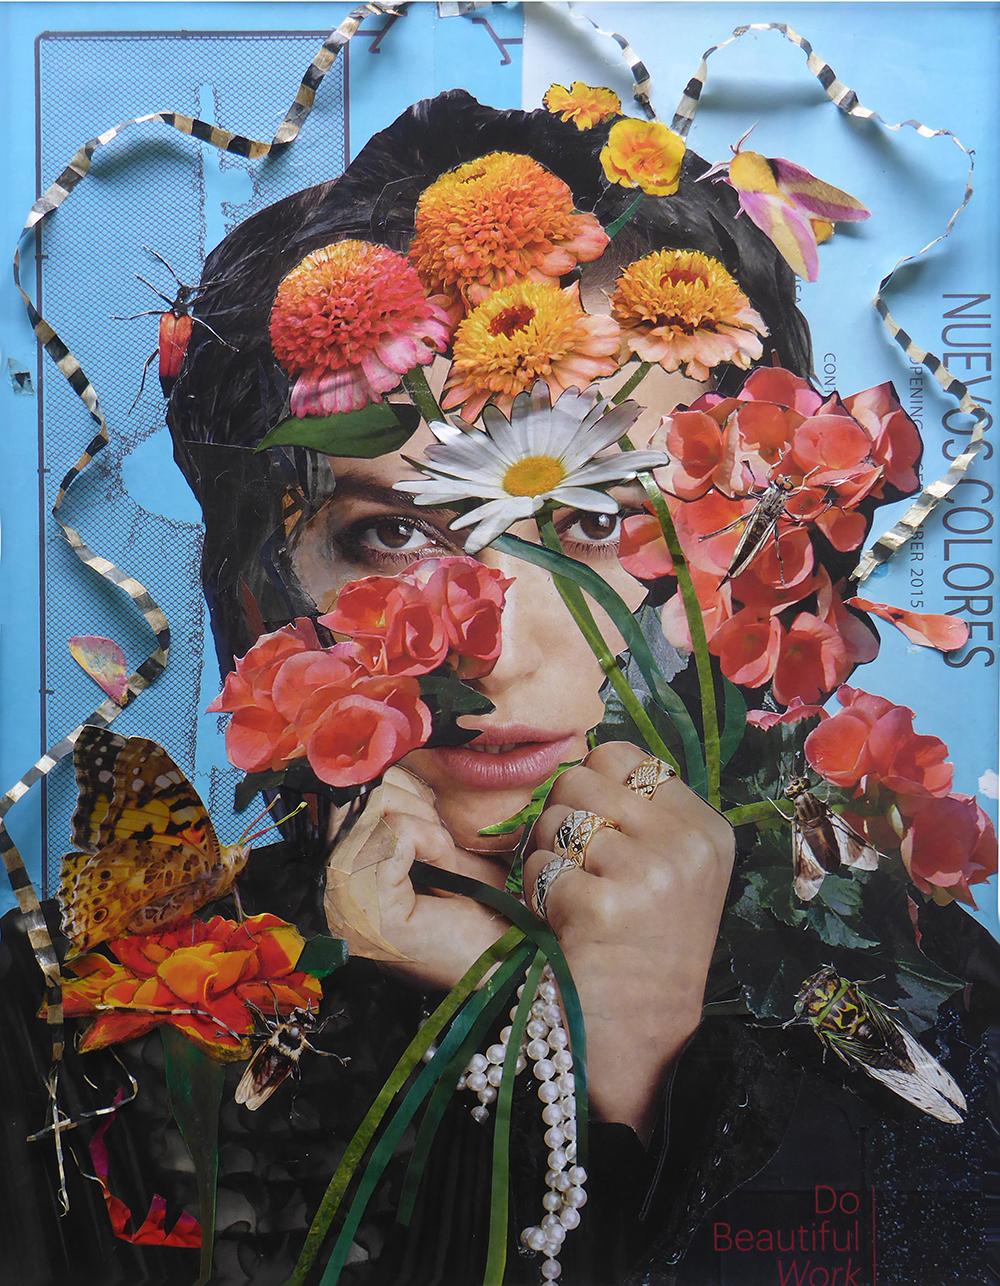 Paper collage with found objects